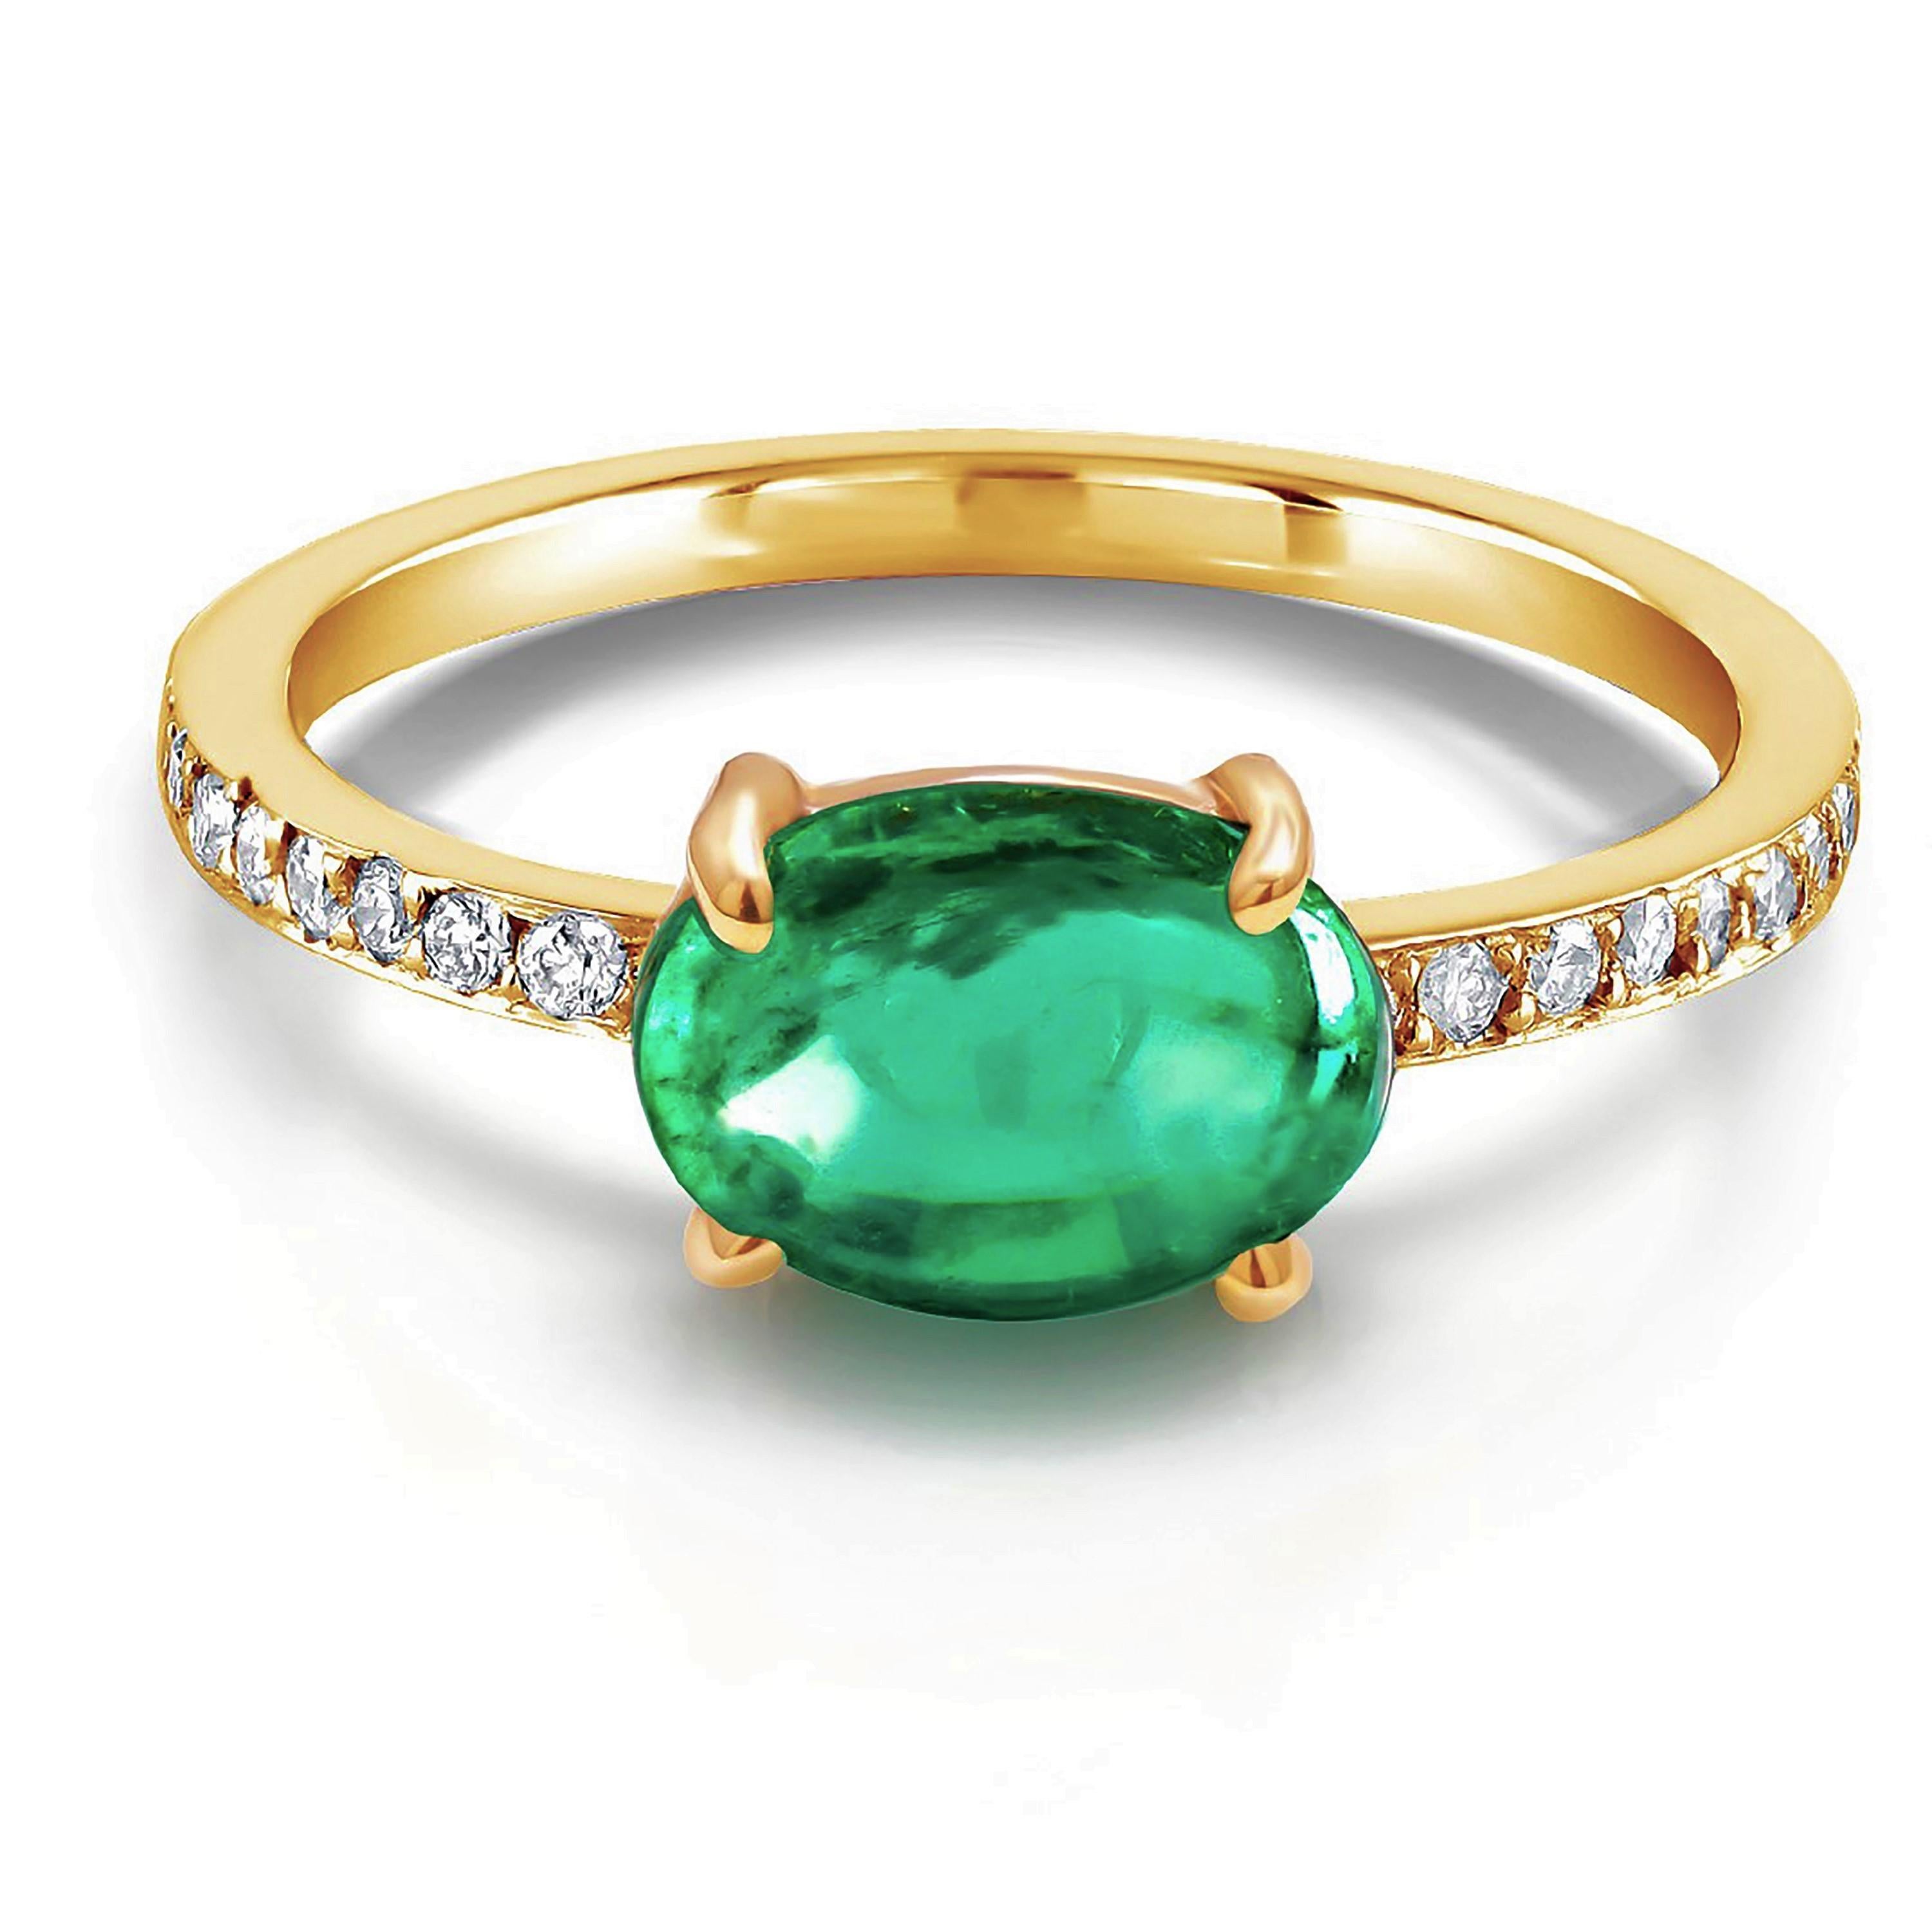 Oval Cut Cabochon Emerald and Diamond Yellow Gold Cocktail Ring Weighing 2.14 Carat